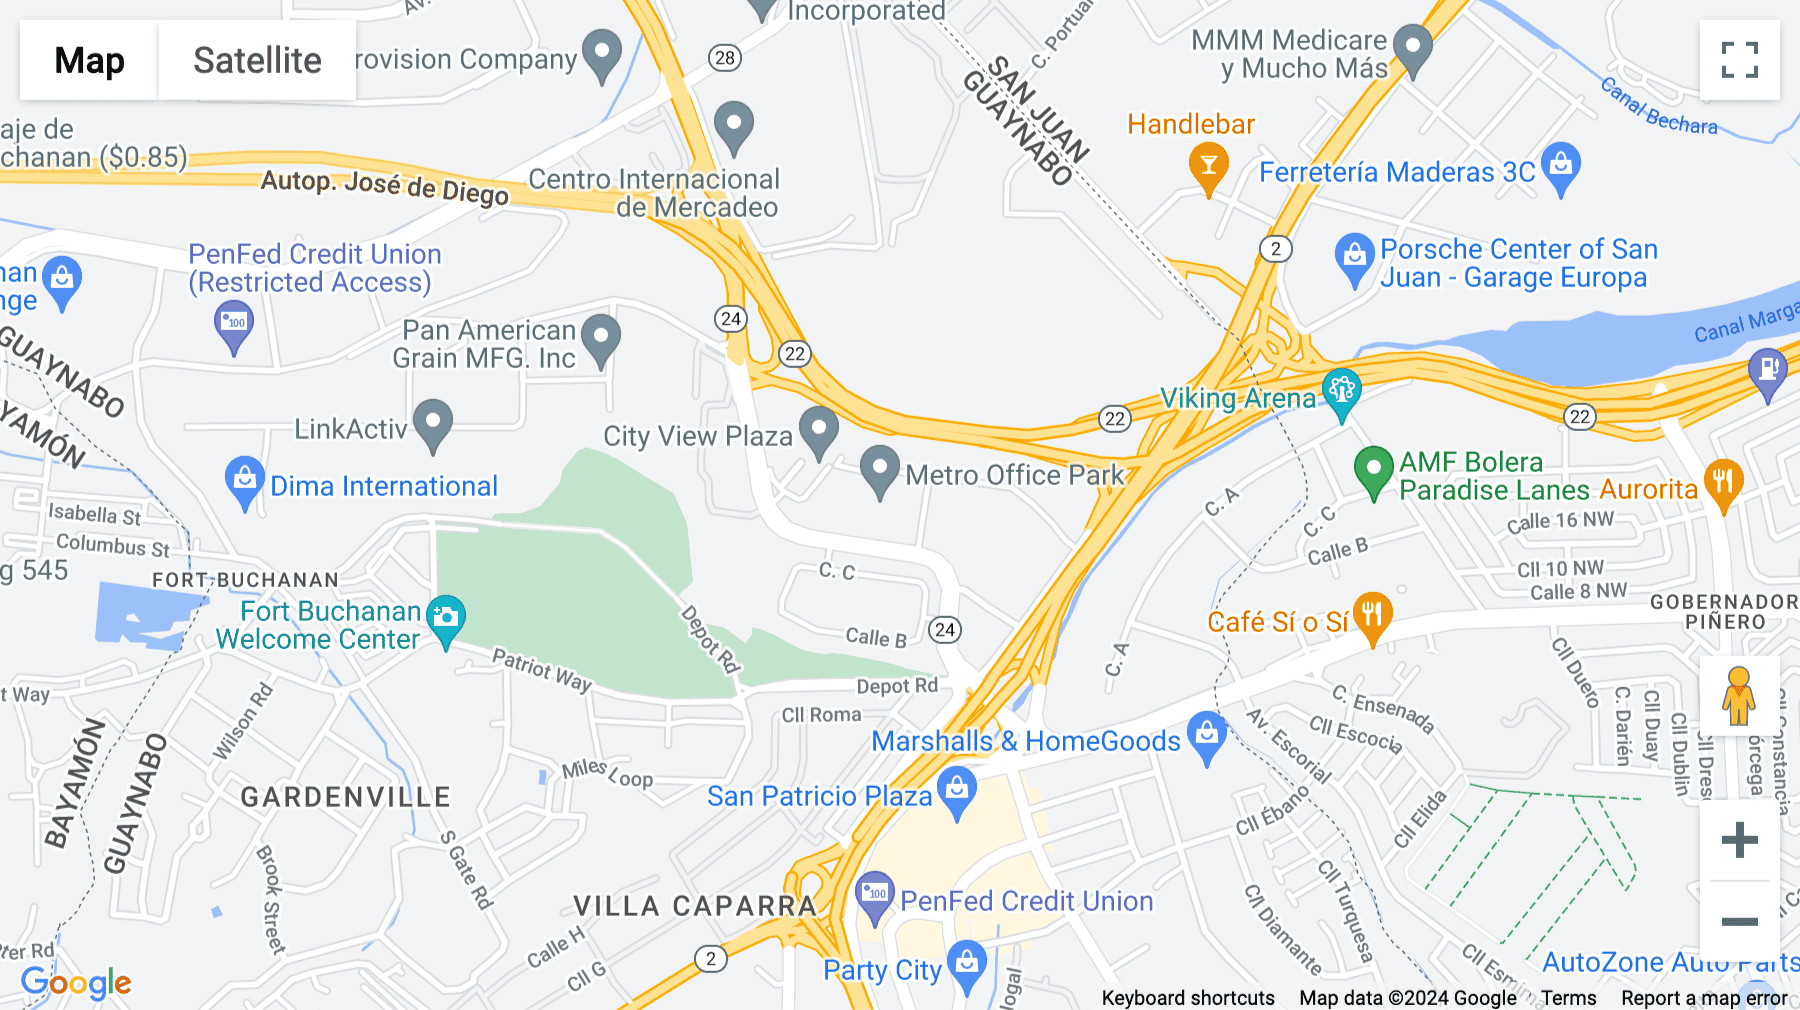 Click for interative map of Metro Office Park 2, Street 1, Guaynabo